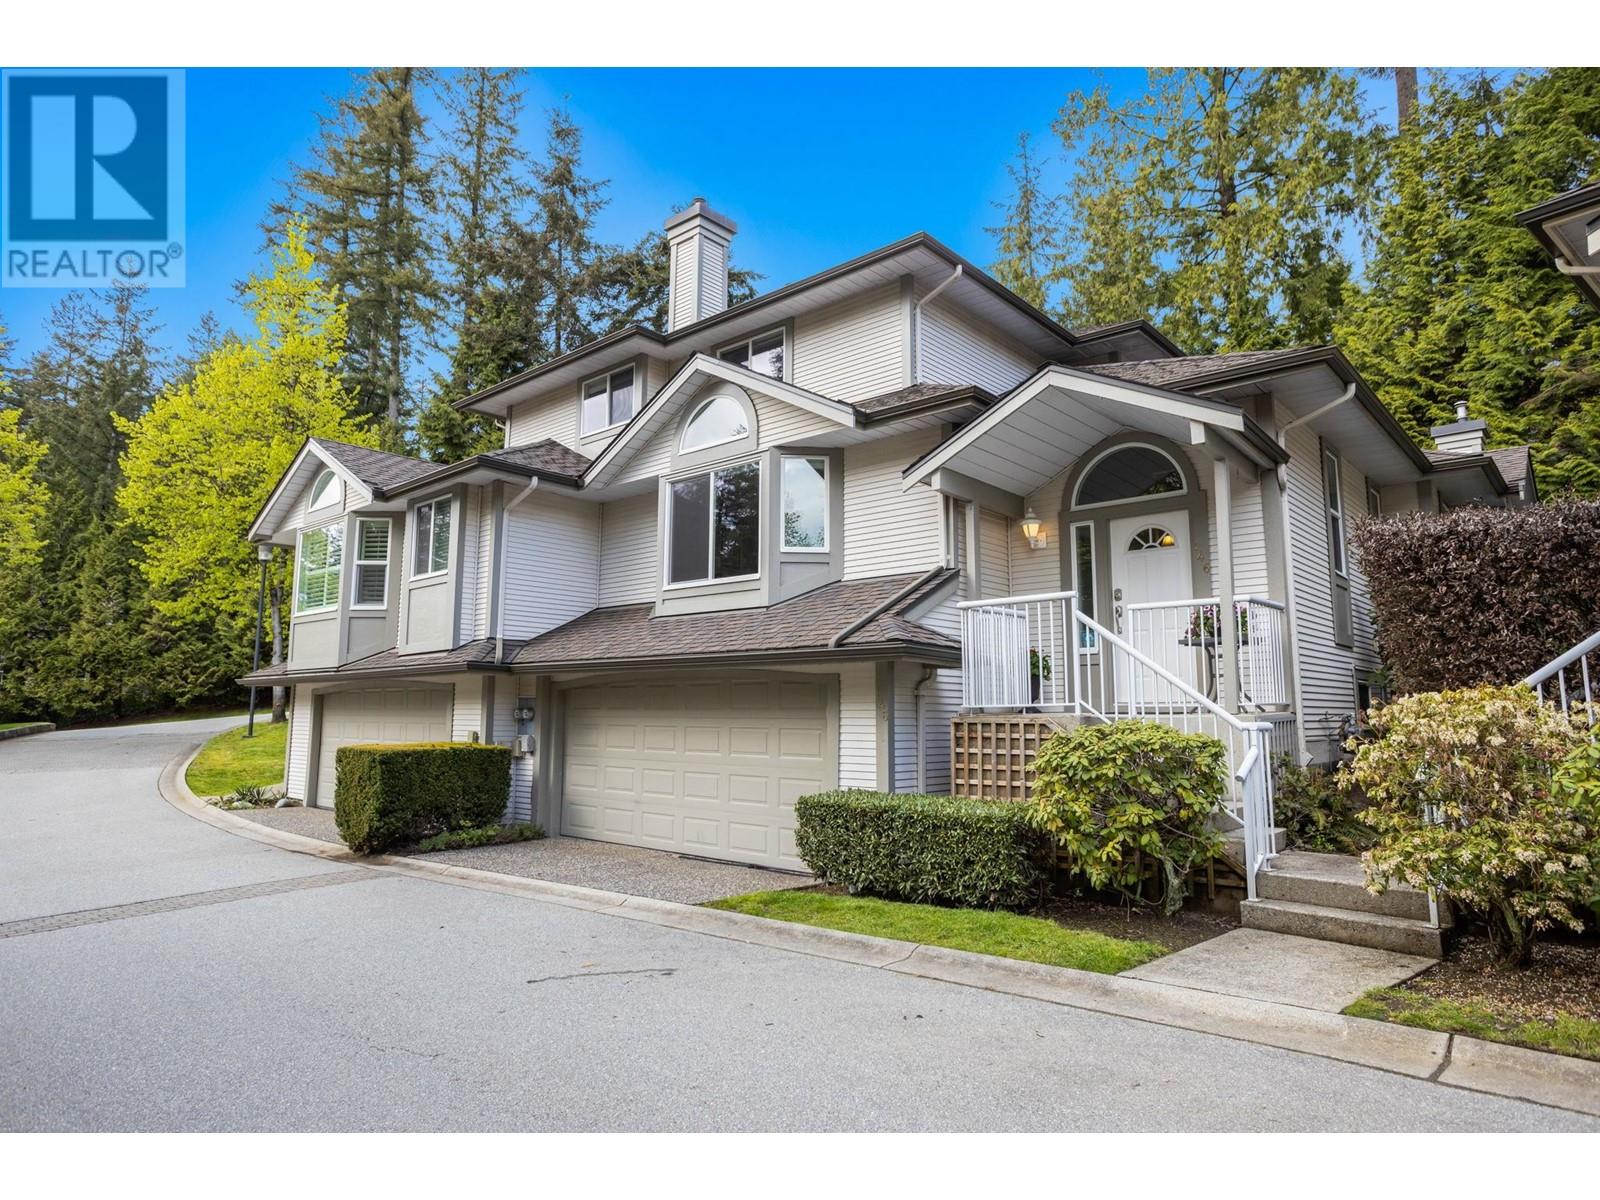 146 101 PARKSIDE DRIVE, port moody, British Columbia